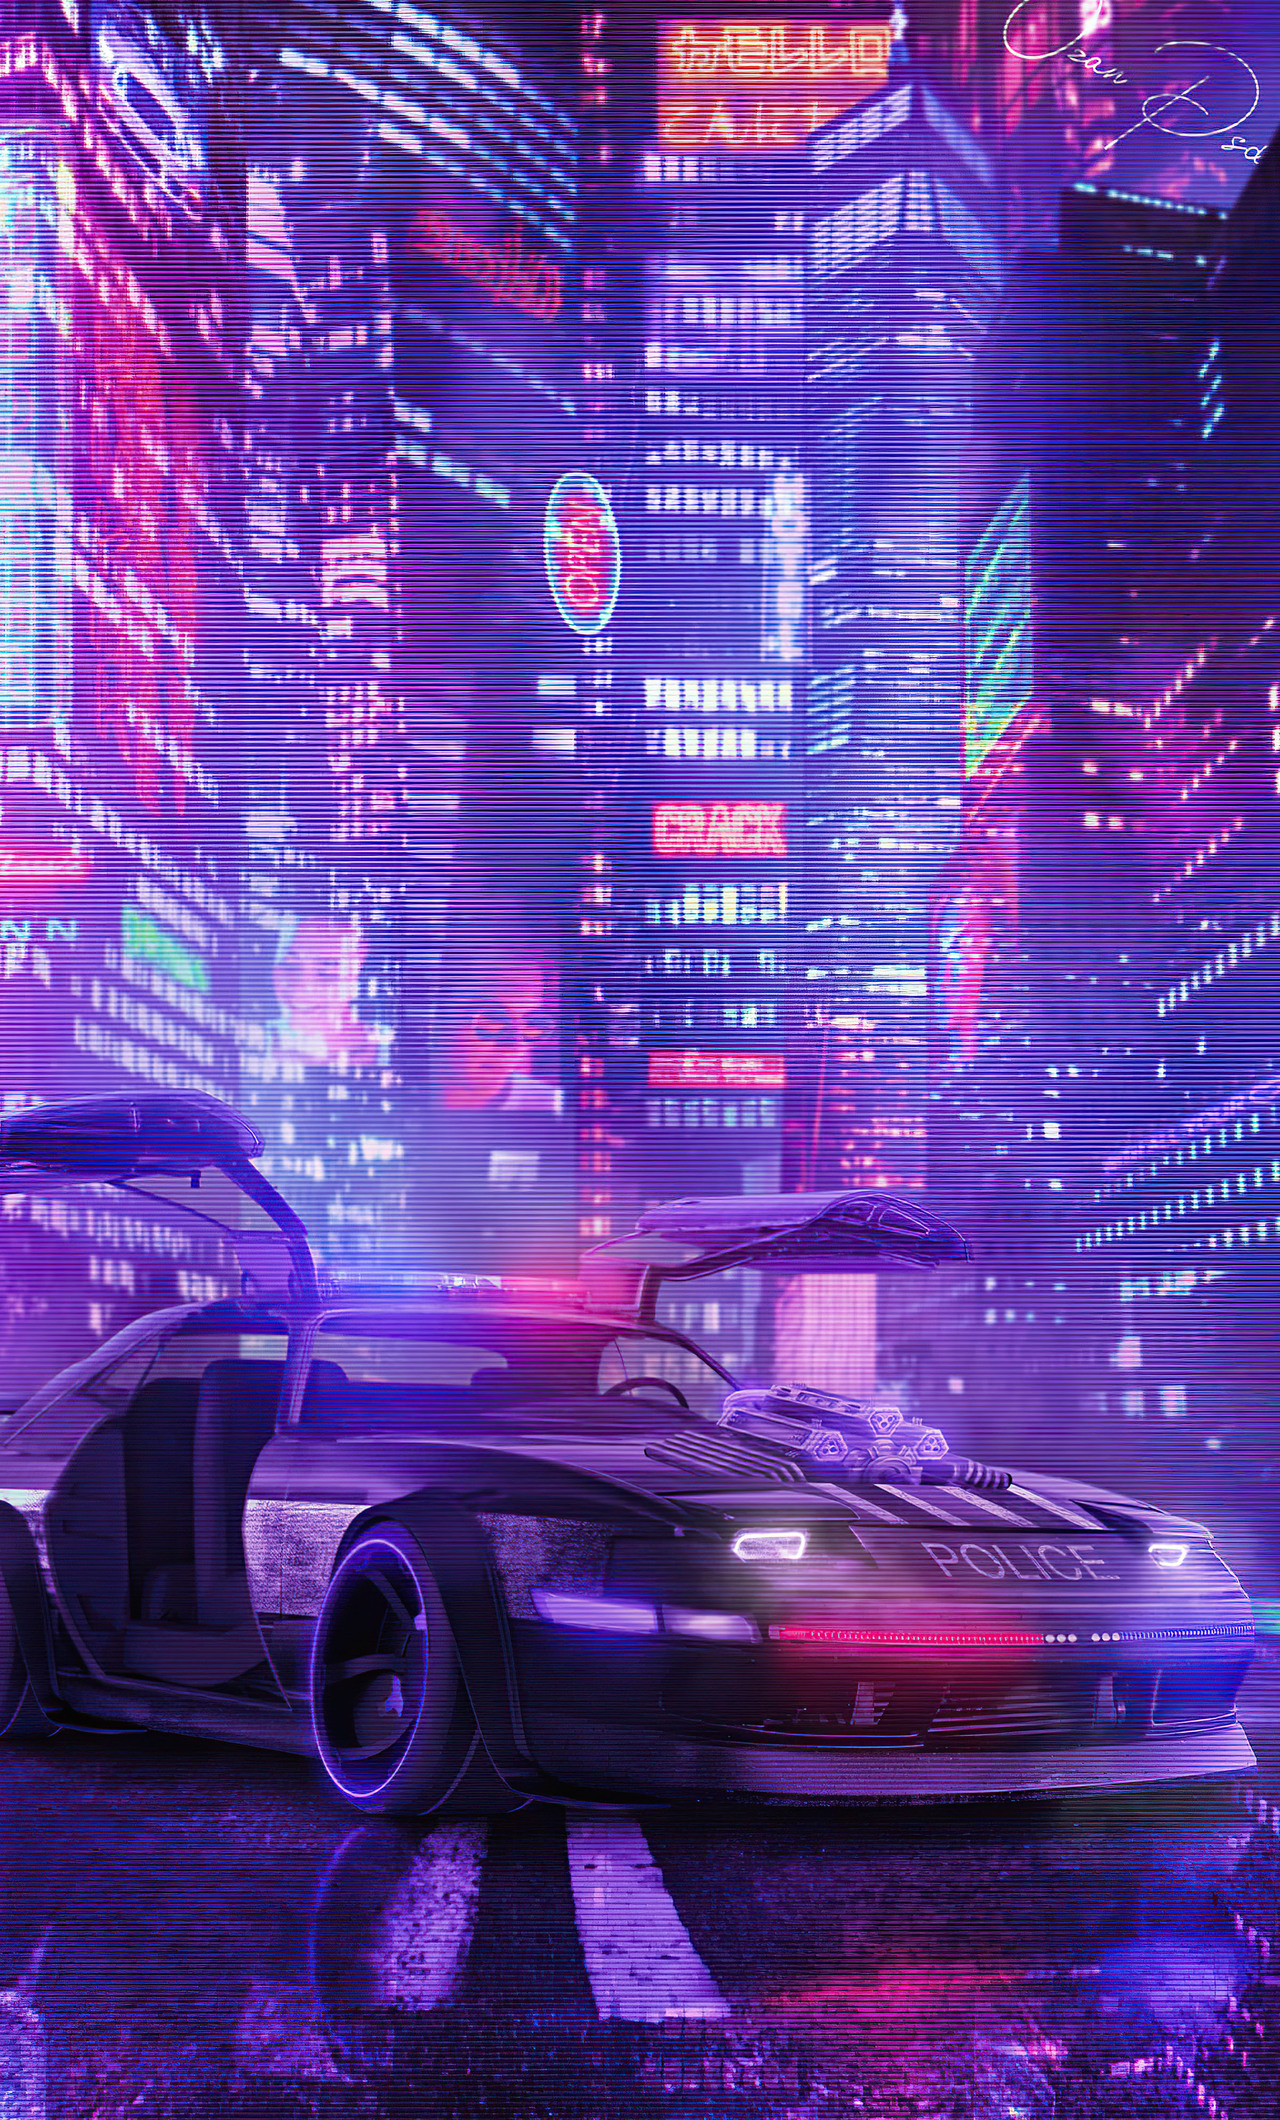 A cyberpunk police car with purple and blue lights sits in front of a cityscape of neon lights. - Punk